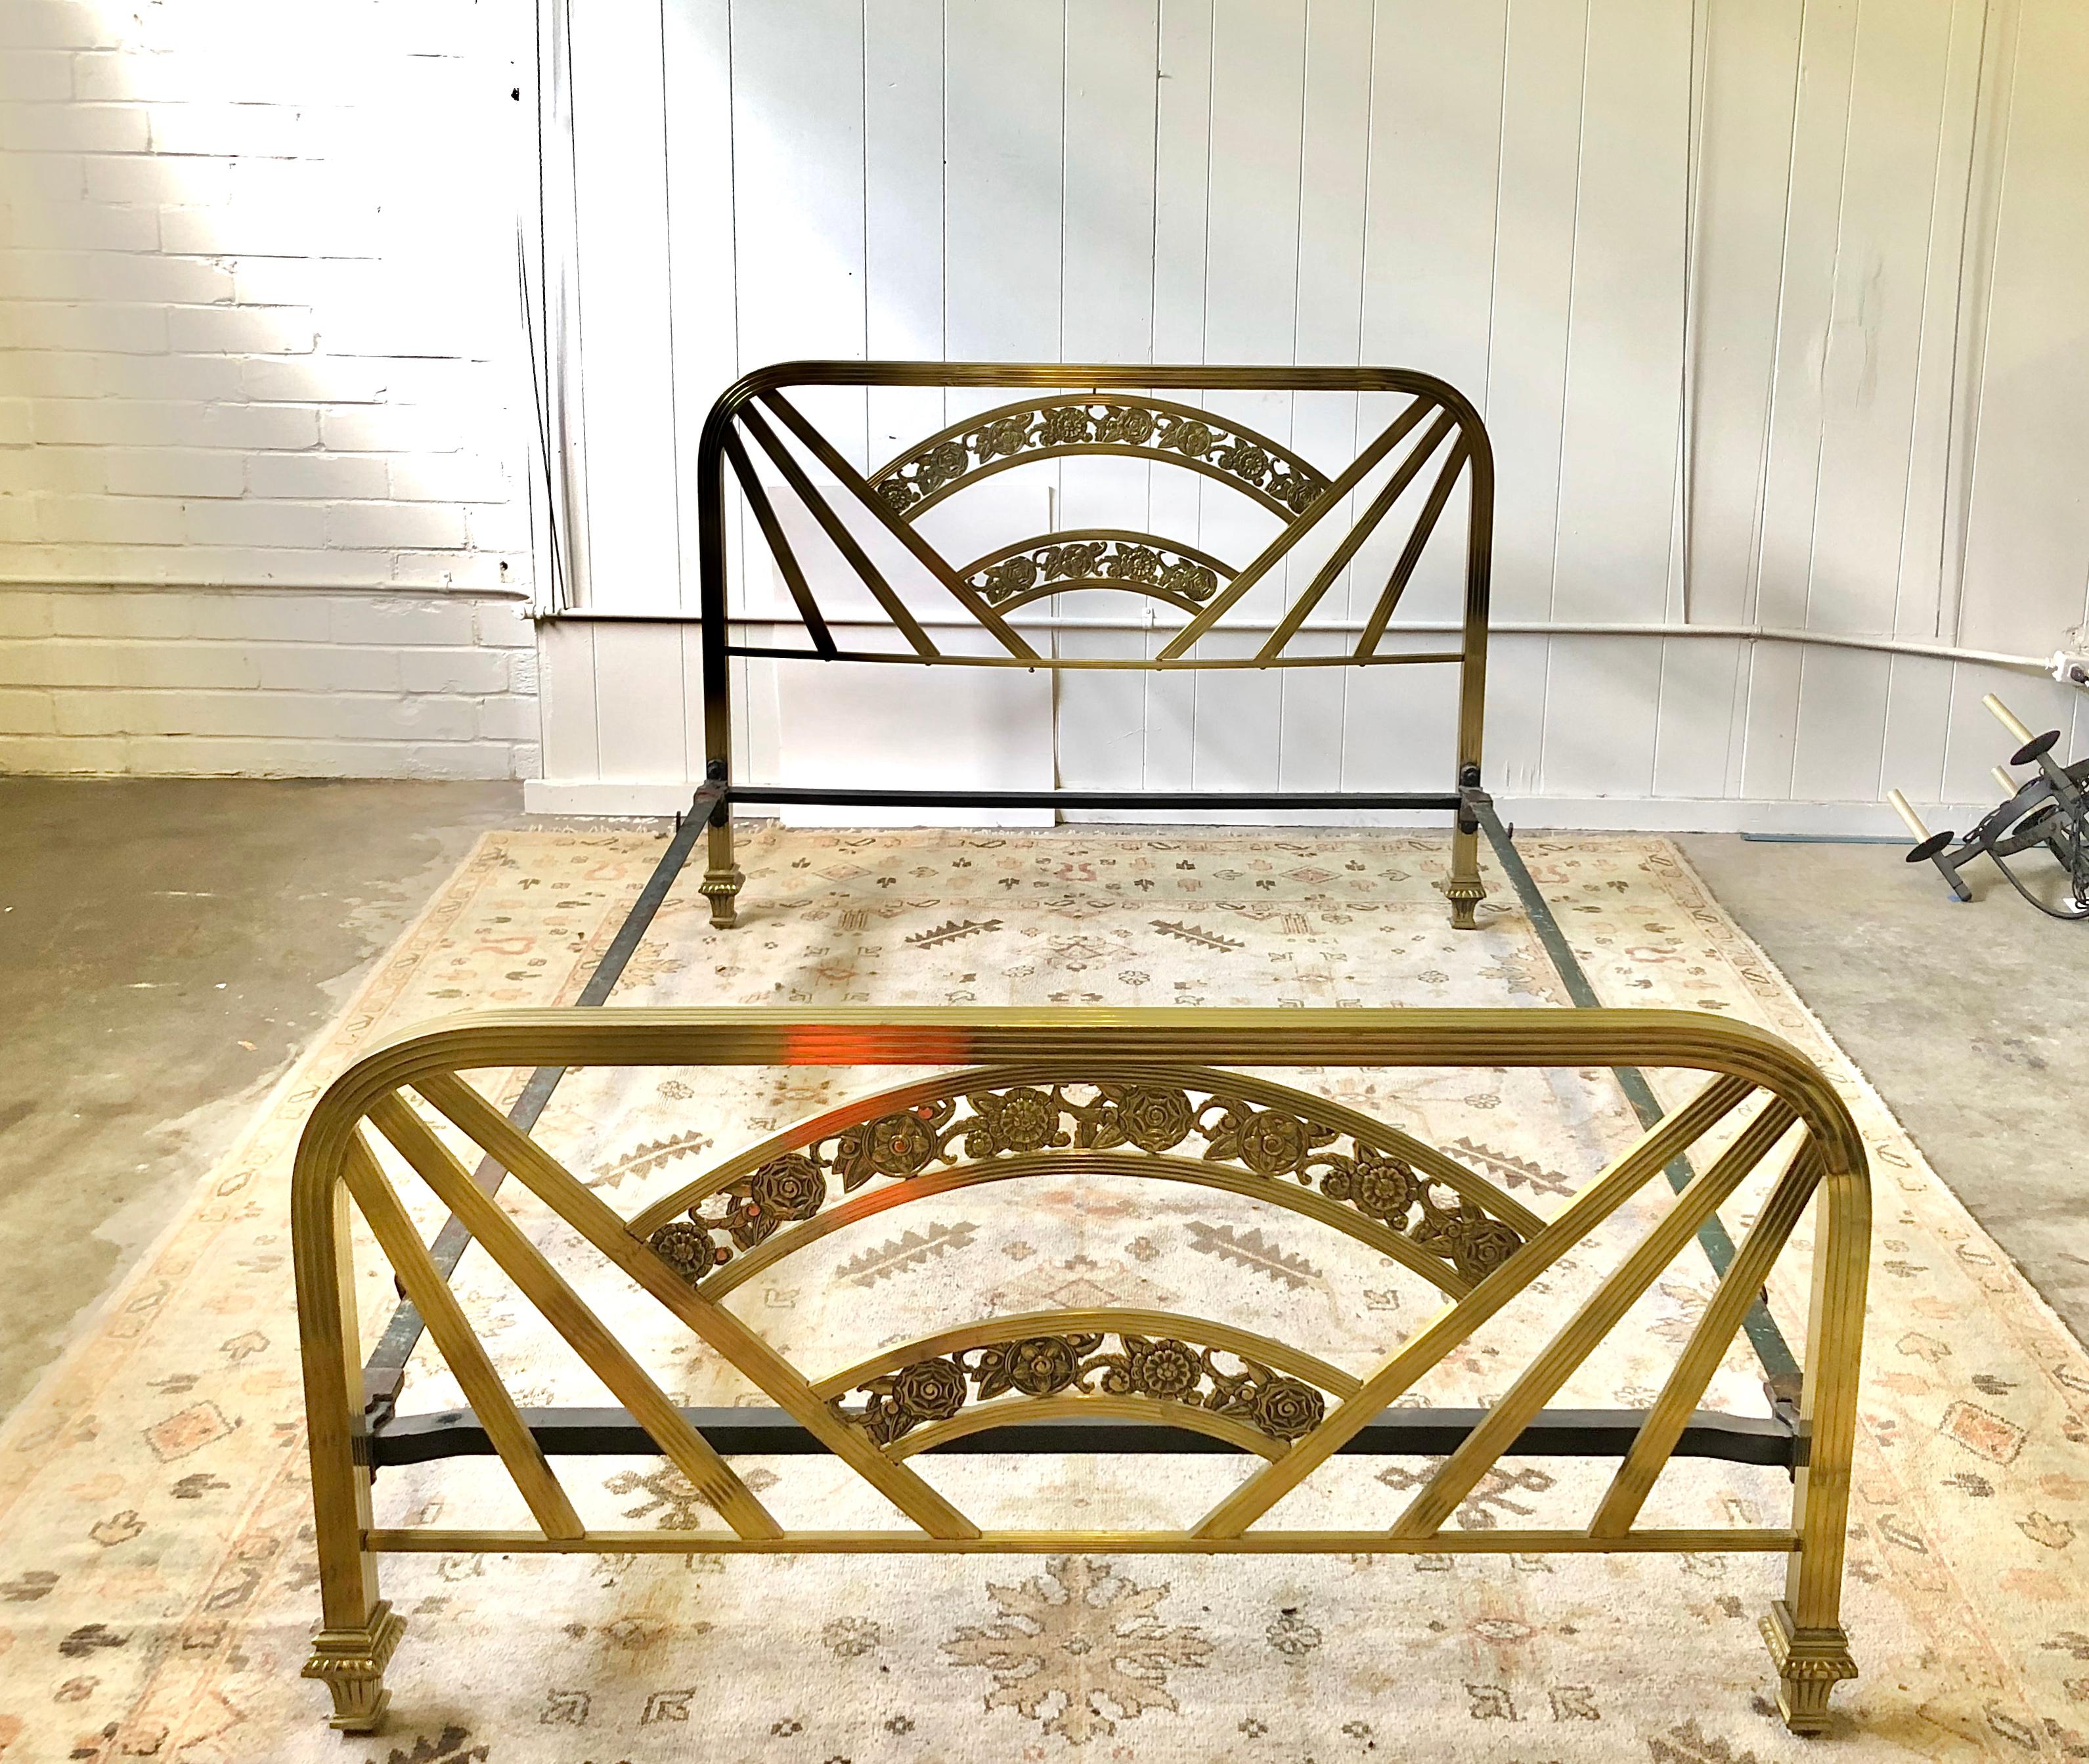 Antique Art Deco Brass Bed - 5 For Sale on 1stDibs | art deco bed